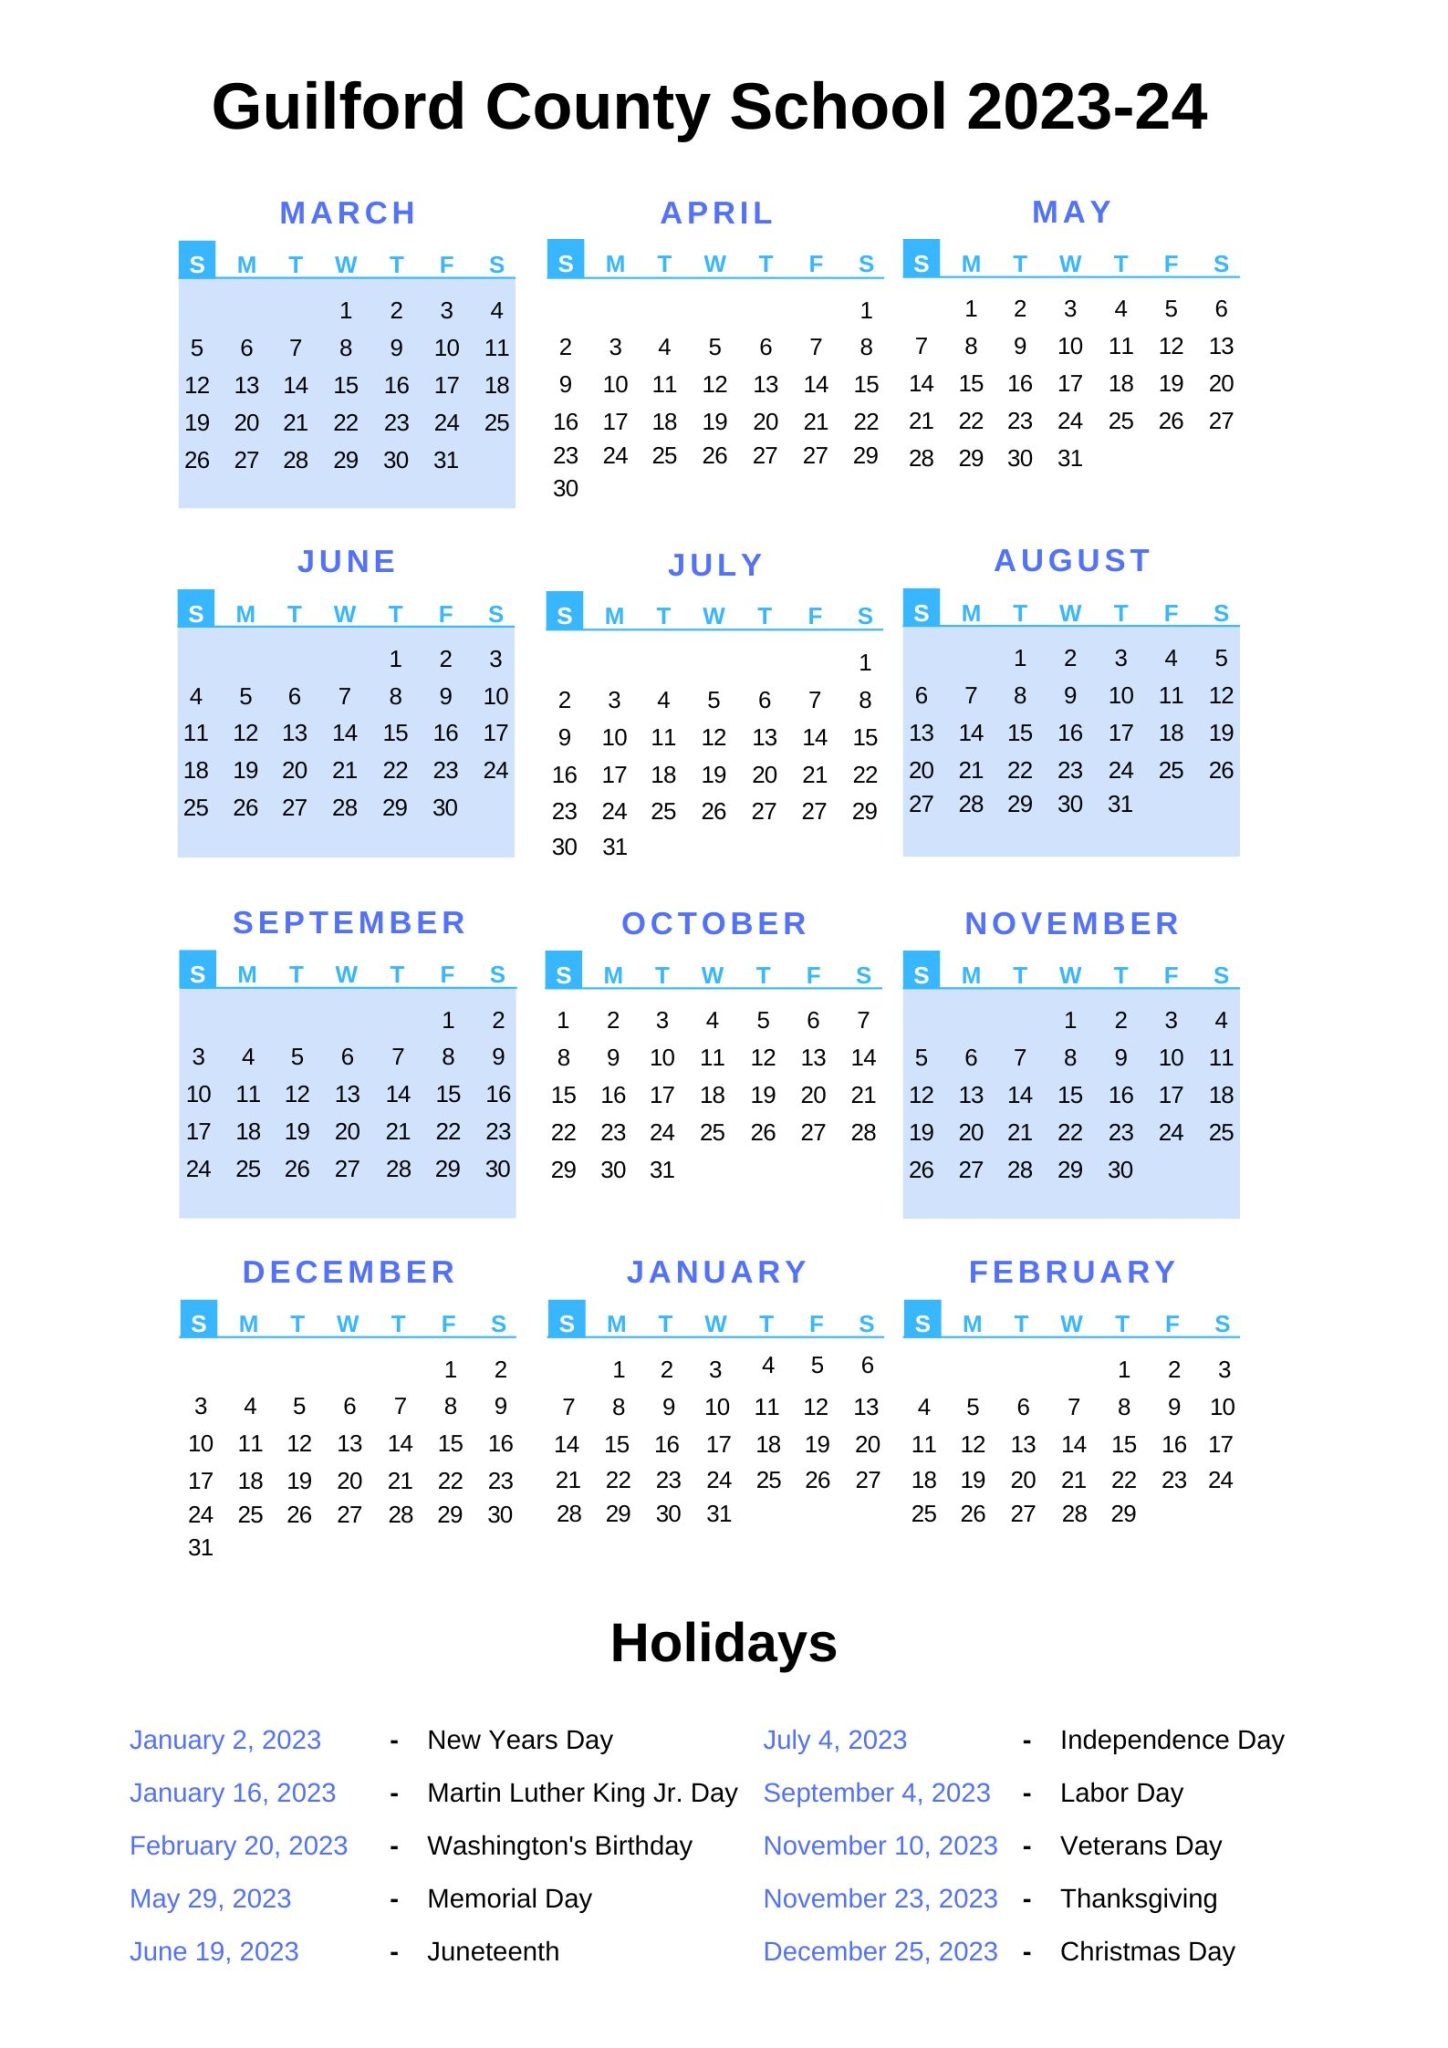 Guilford County Schools Calendar 202324 With Holidays